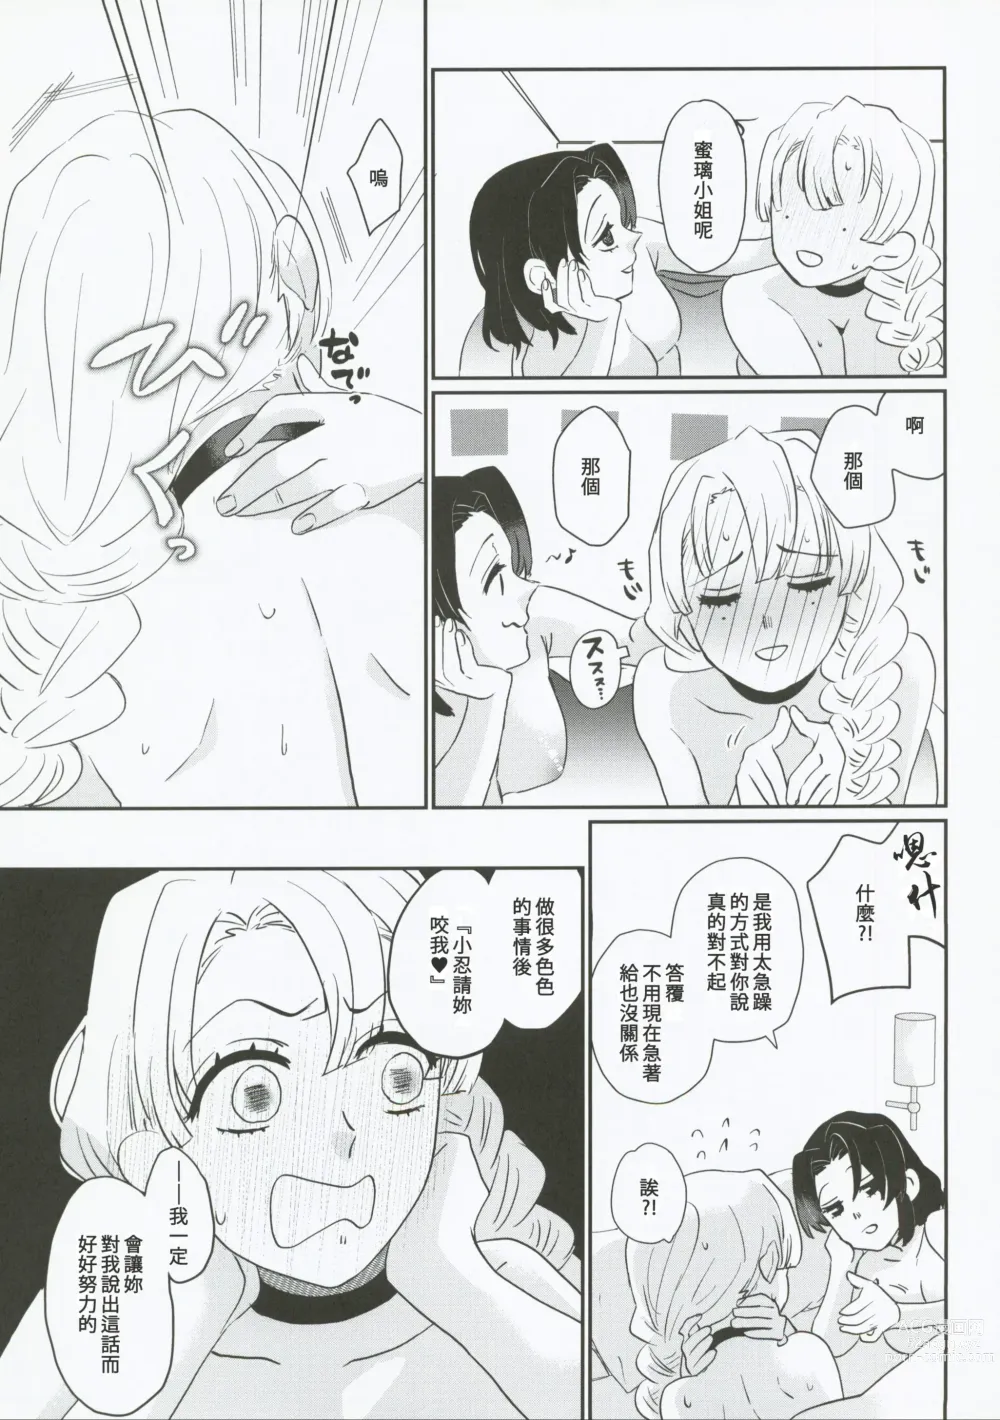 Page 44 of doujinshi 屬於妳的Omega